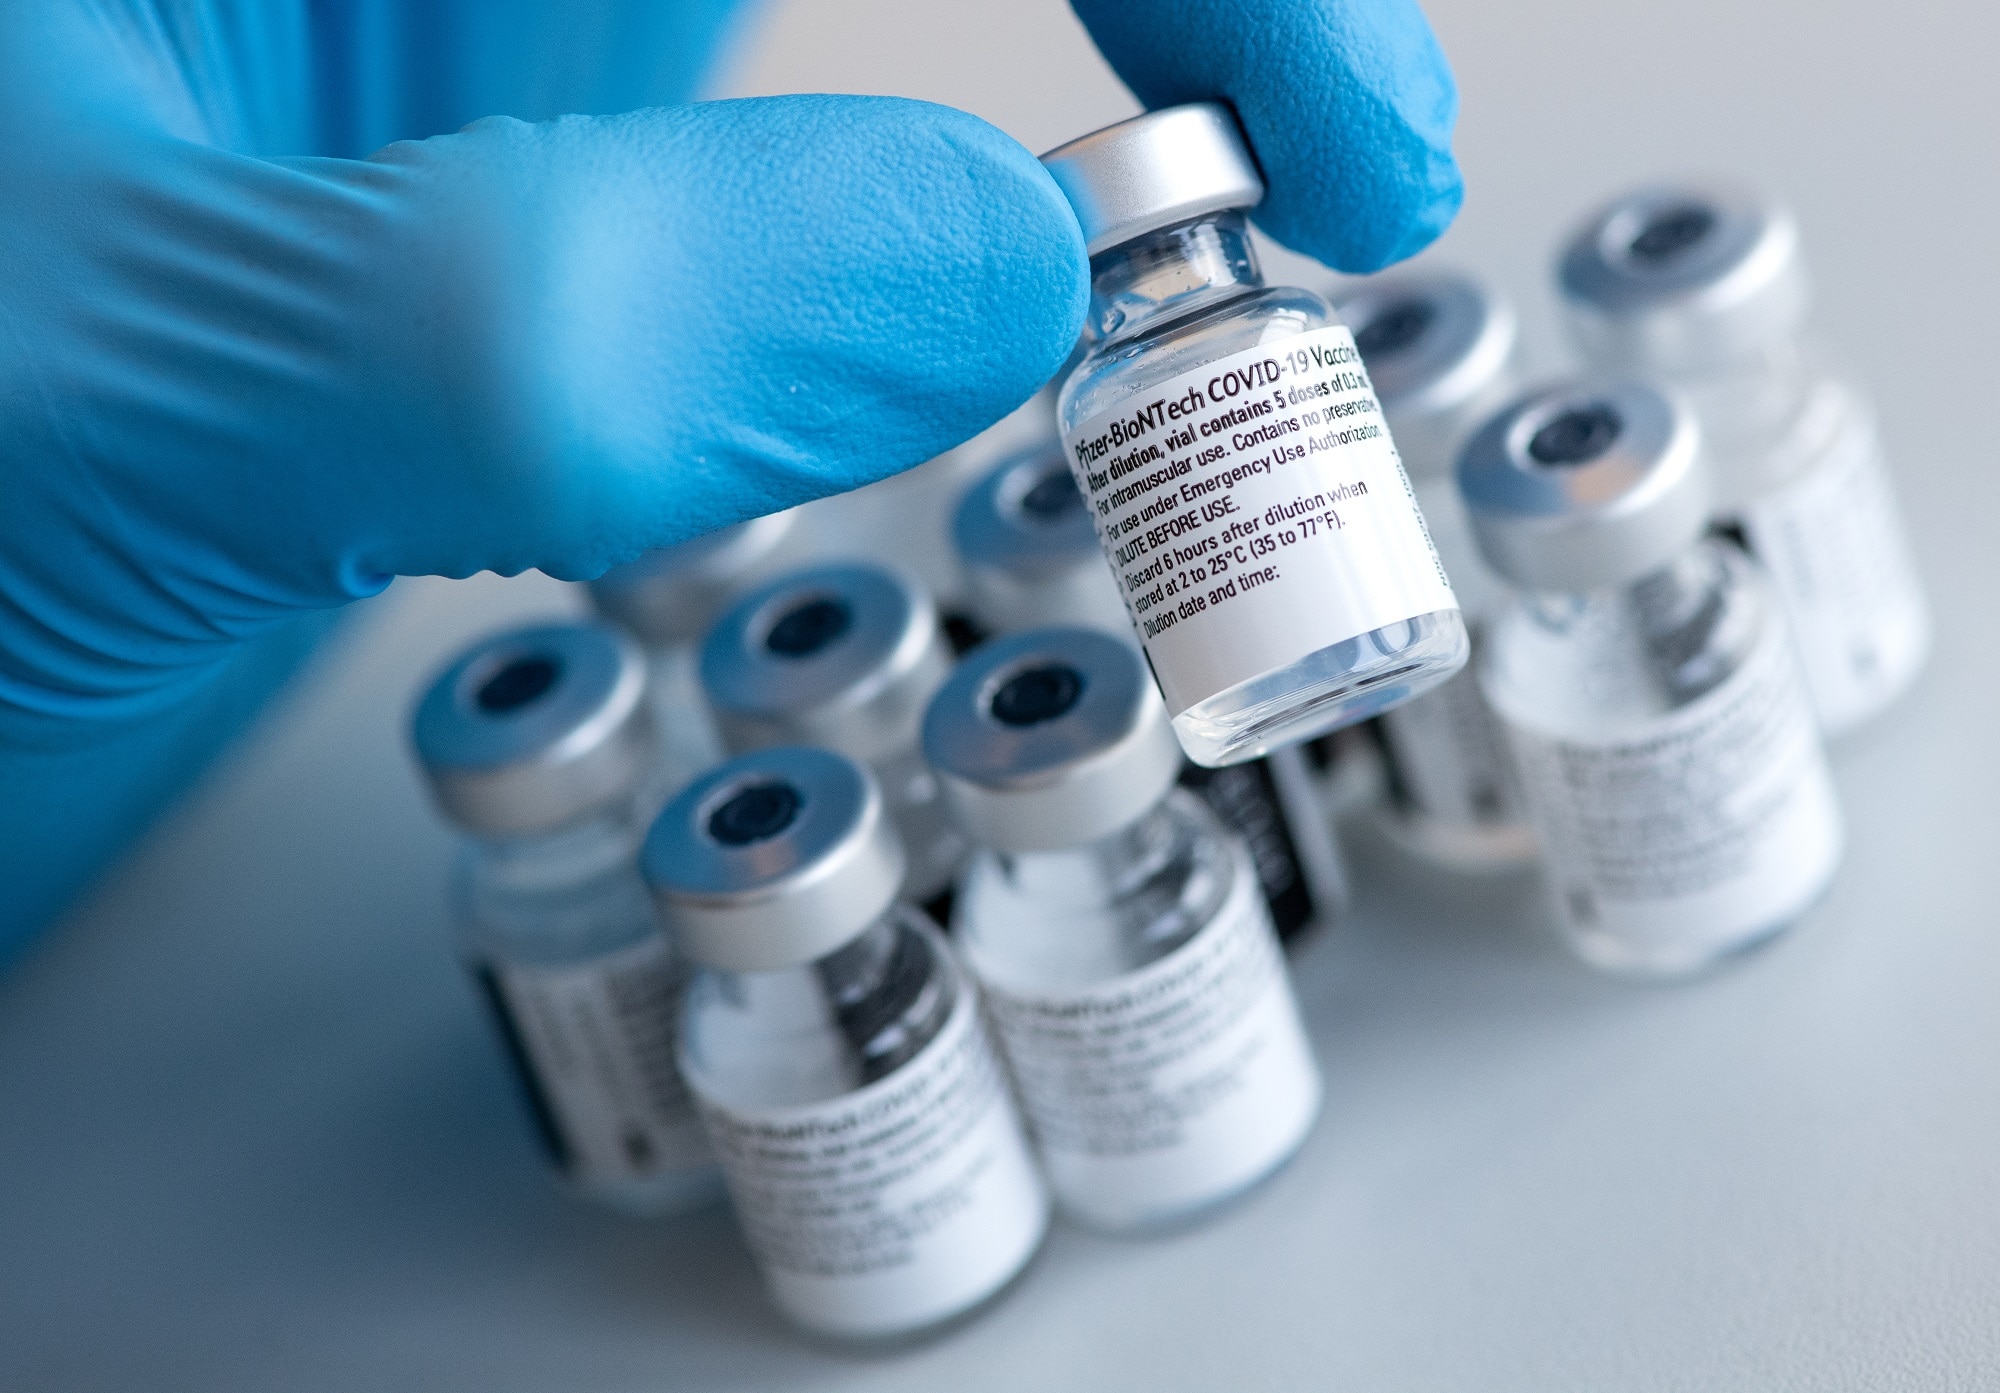 The coronavirus vaccine produced by BioNTech/Pfizer can be used for children aged 12 and up, according to the European Medicines Agency regulatory body. 